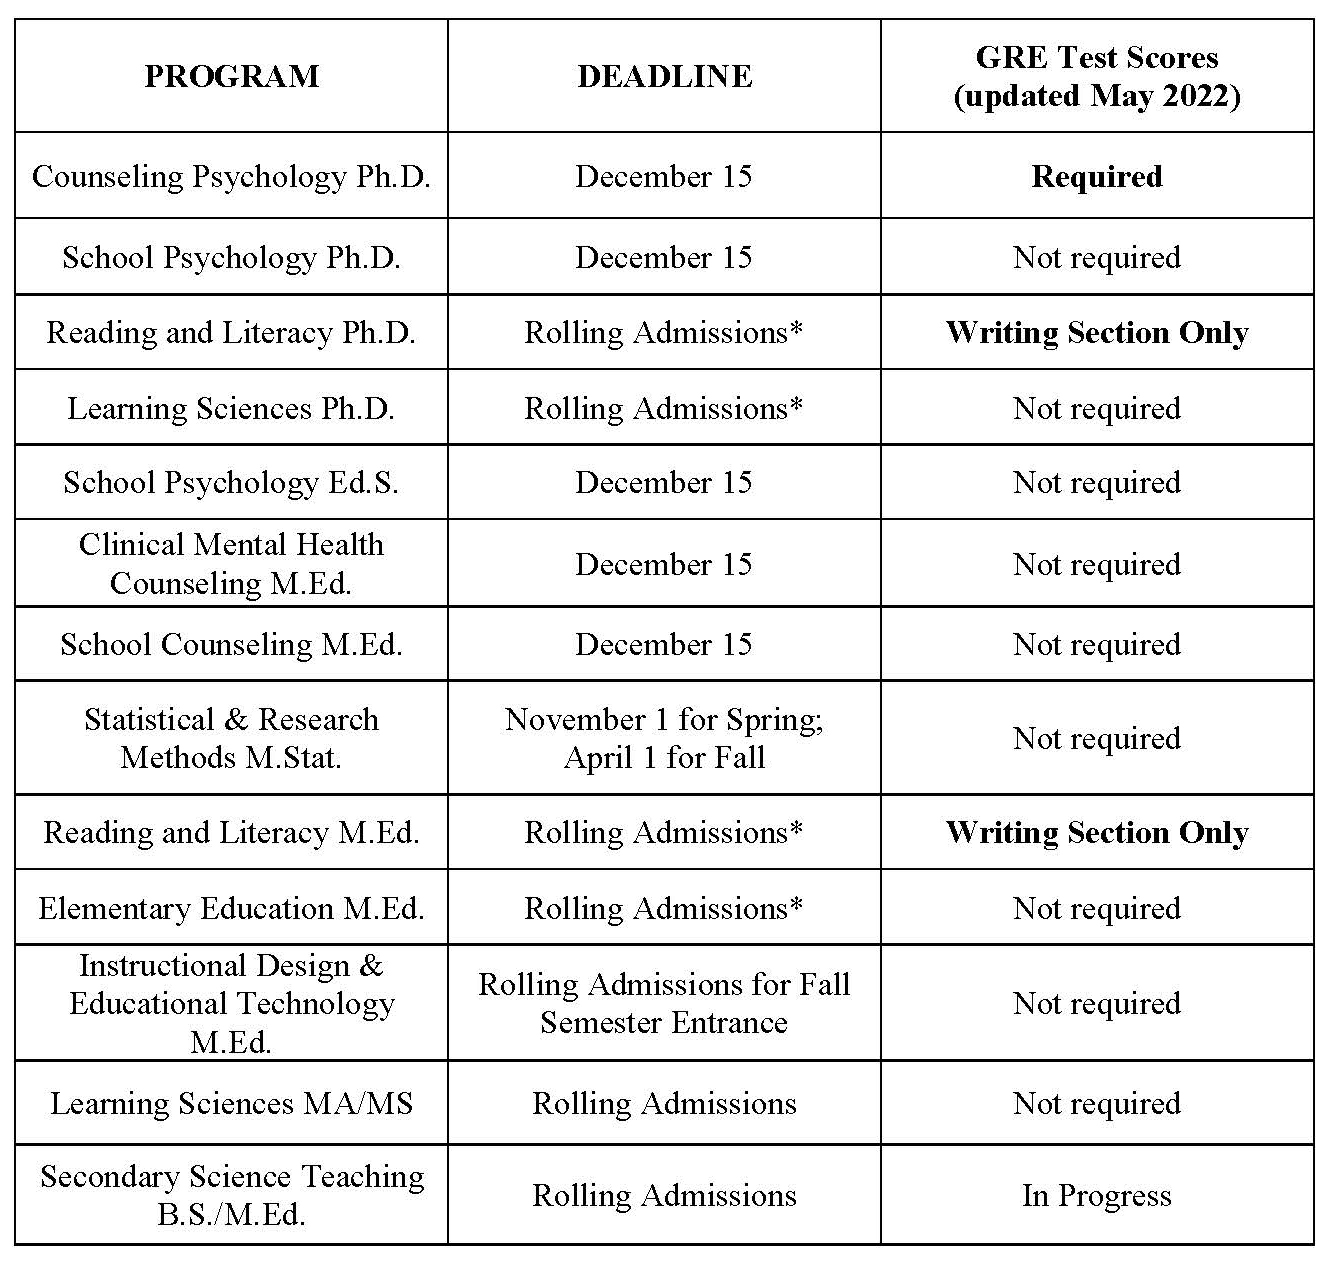 GRE Requirements